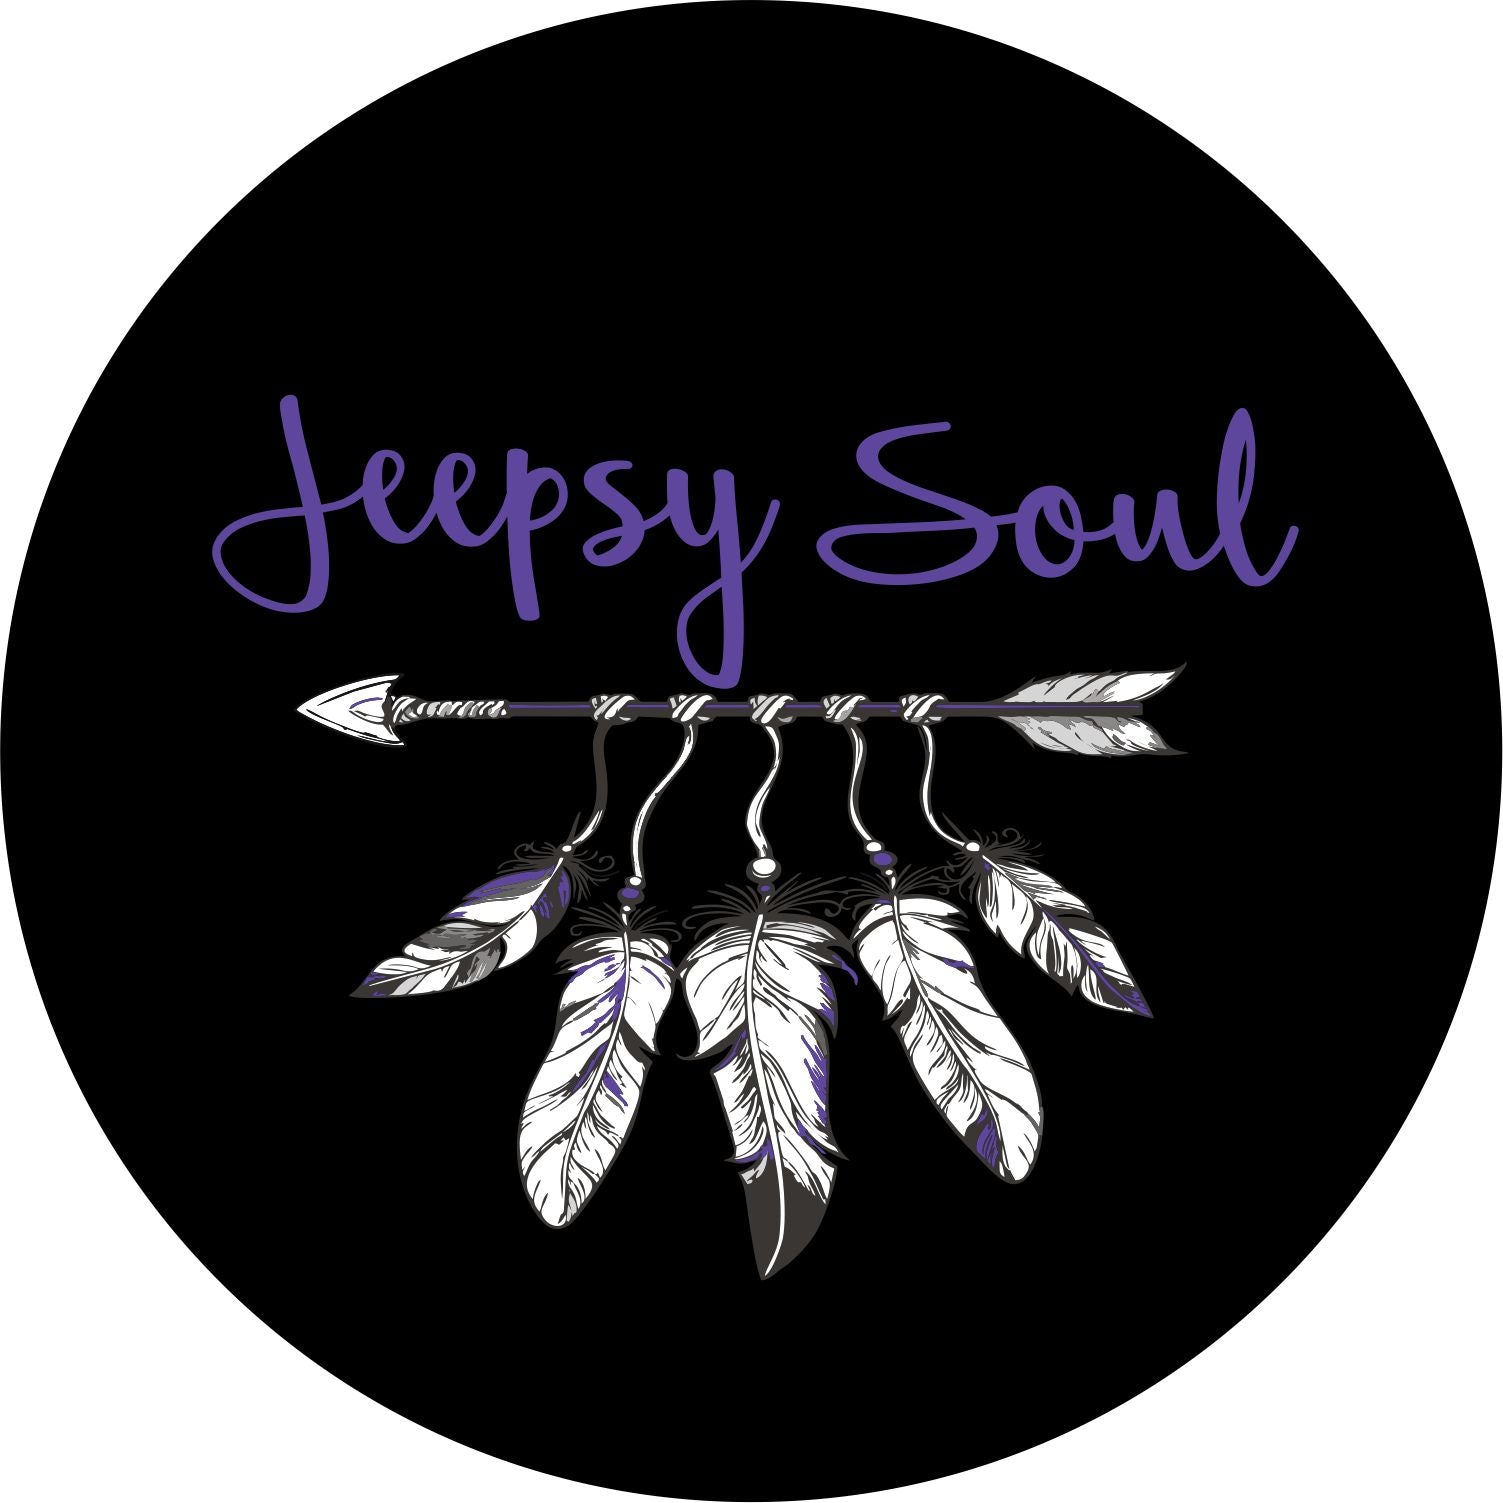 Jeepsy Soul with an Arrow and feather spare tire cover for Jeep design in purple